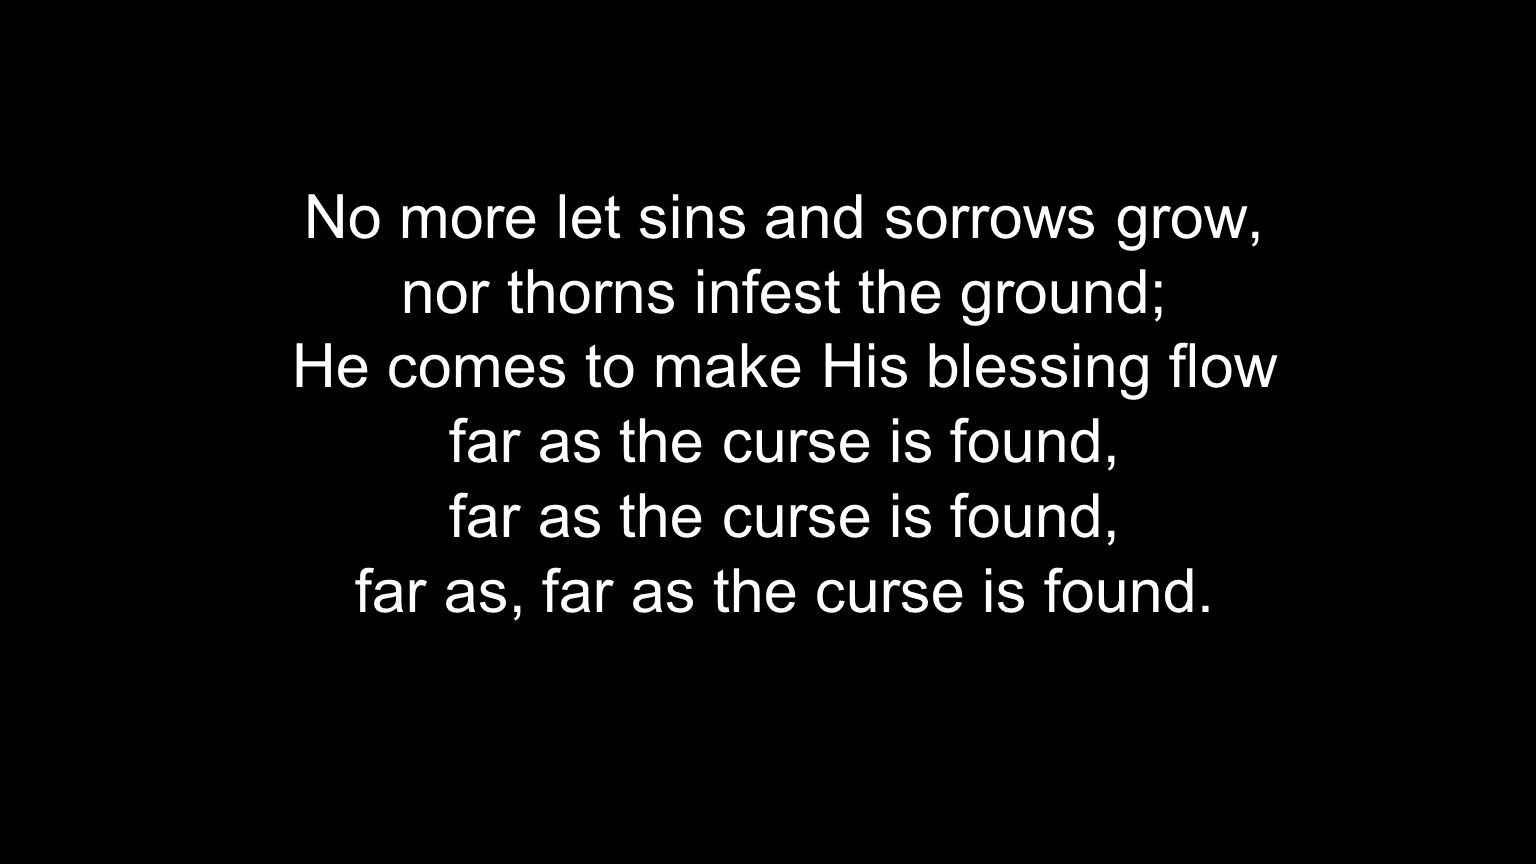 No more let sins and sorrows grow, nor thorns infest the ground; He comes to make His blessing flow far as the curse is found, far as, far as the curse is found.